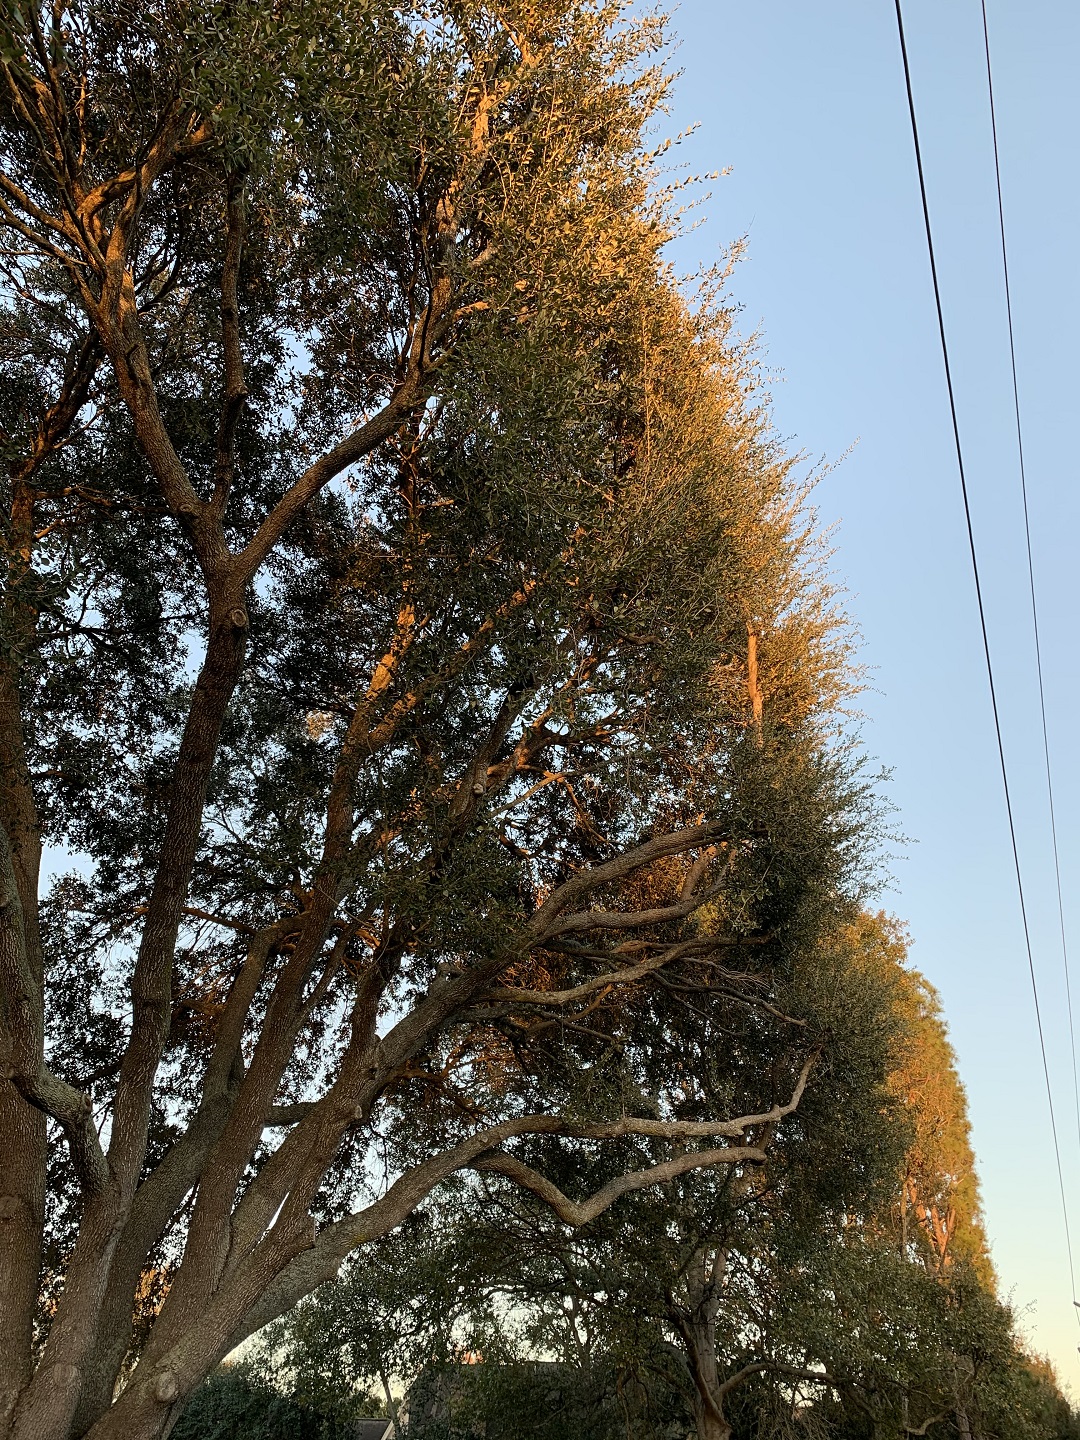 Tree_Service_of_Houston_affordable_tree_service_1531_Hoveden_Dr._Katy__TX_77450